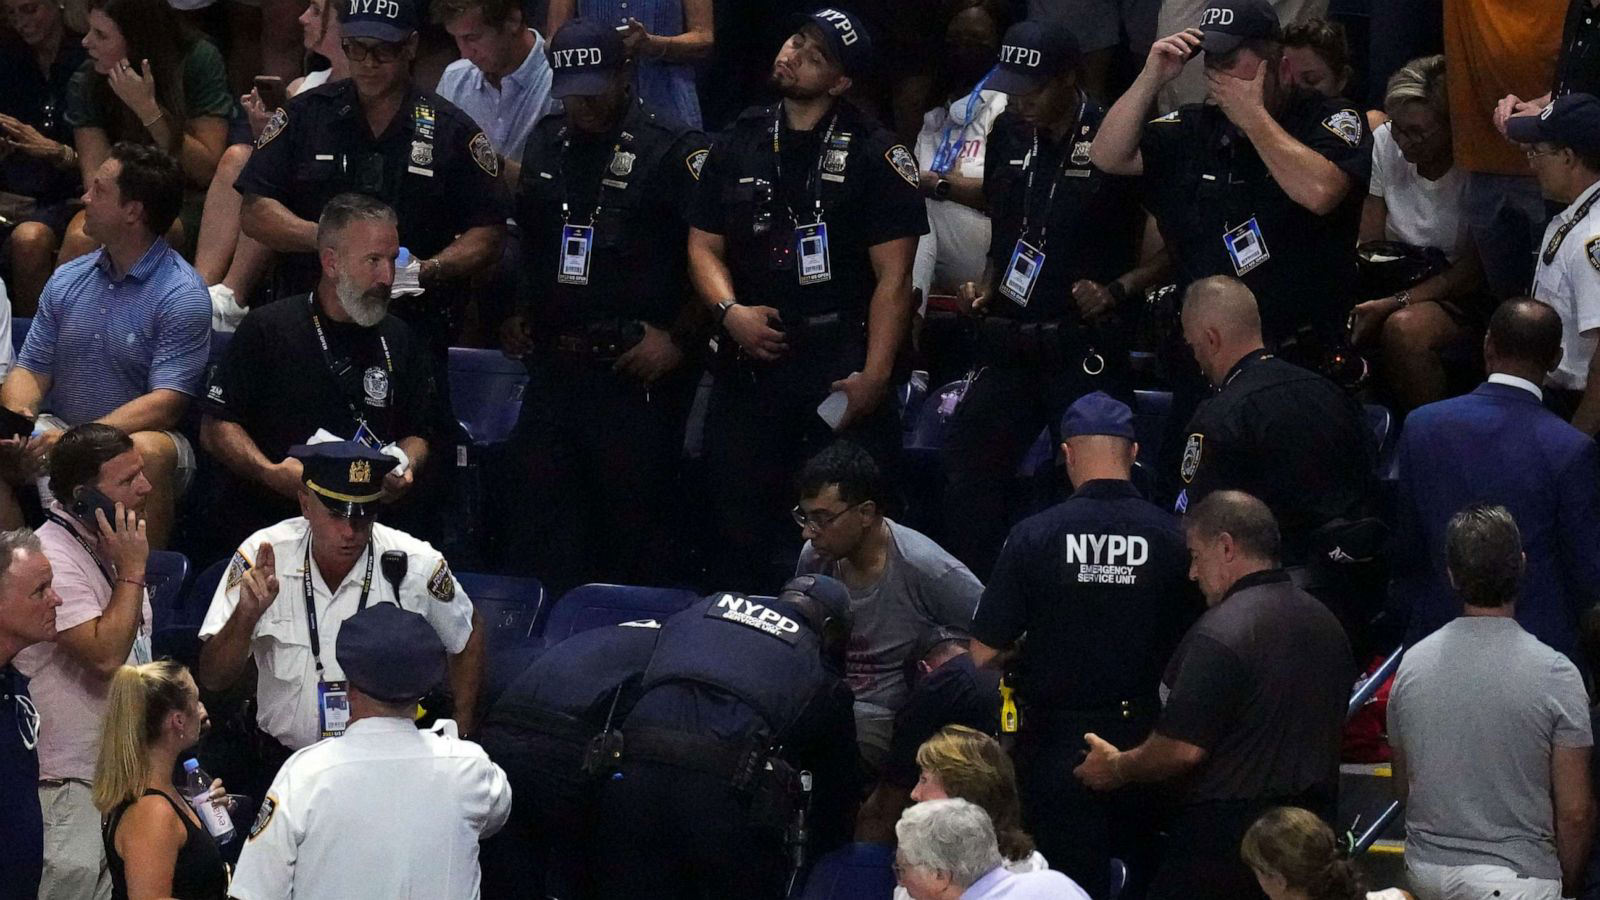 Protesters arrested after delaying US Open match